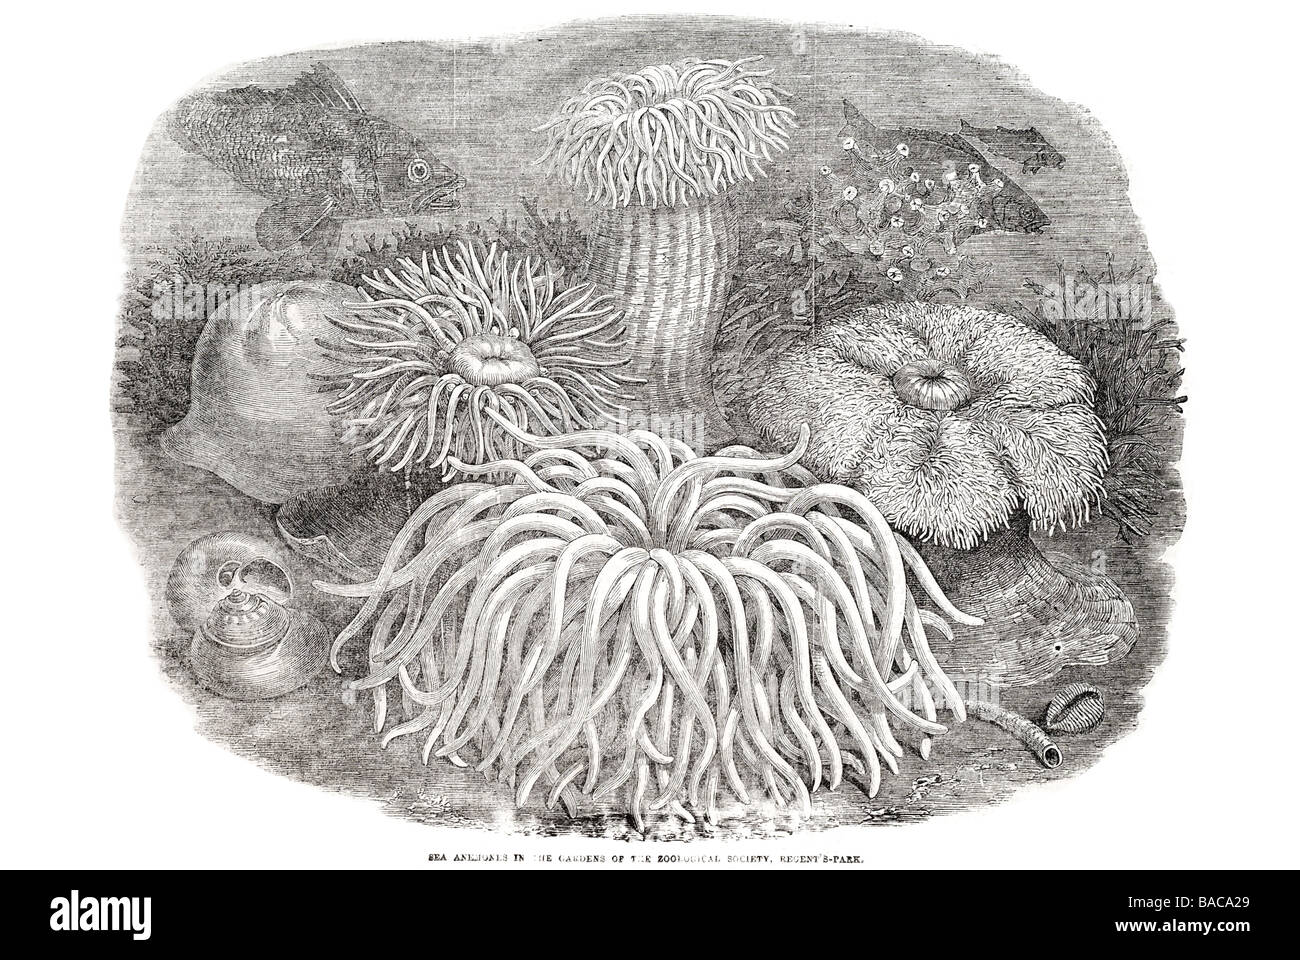 sea anemones in the gardens of the zoological society regents park 1854 Stock Photo